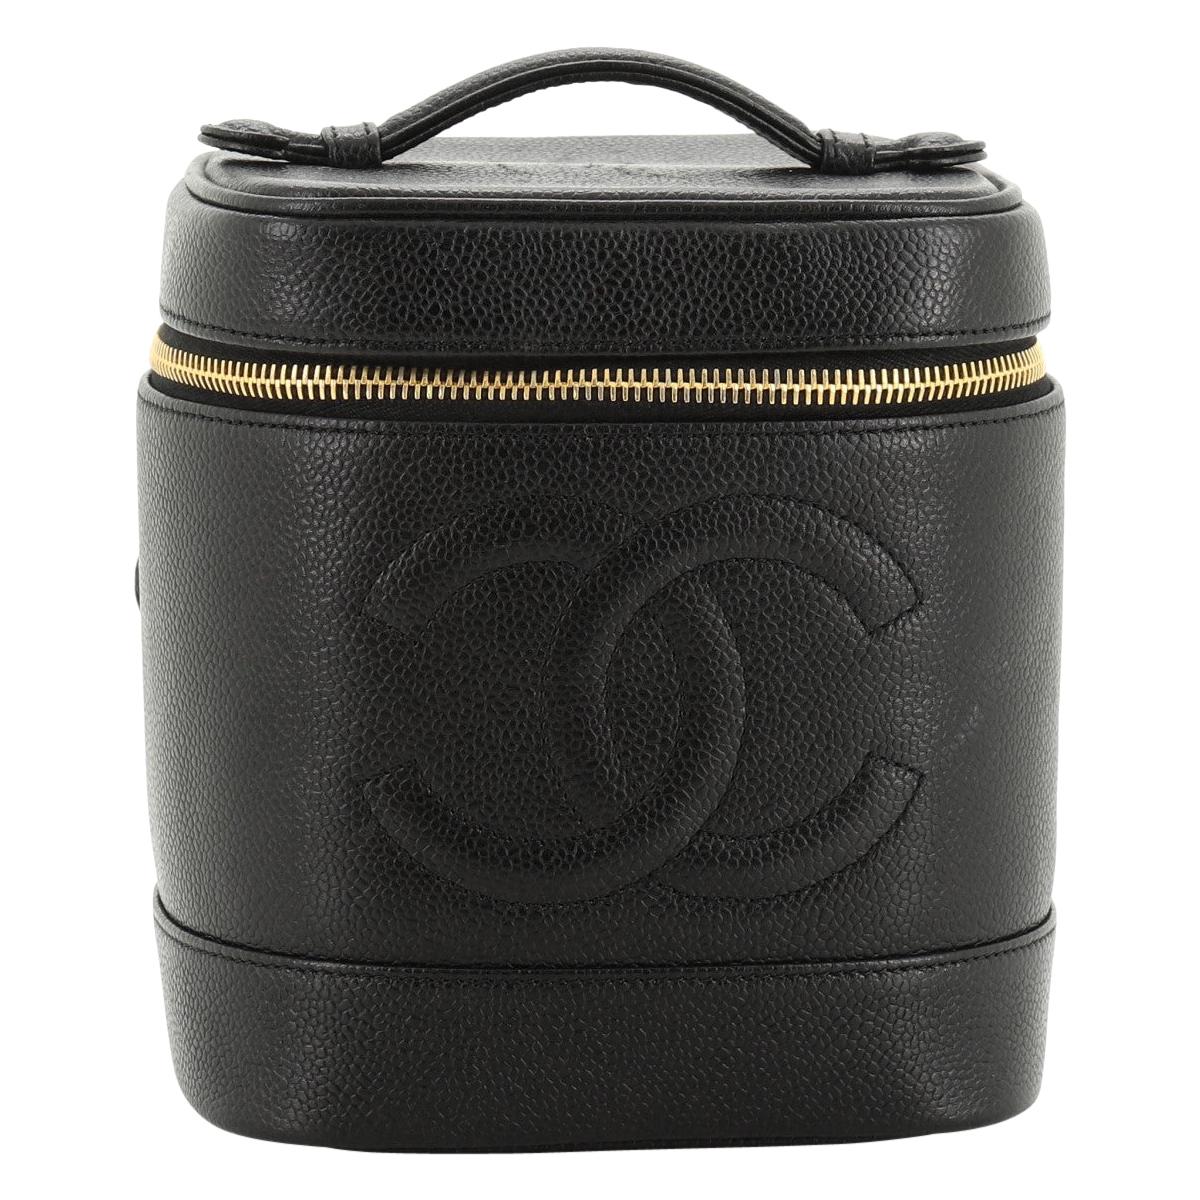 Chanel Vintage Timeless Cosmetic Case